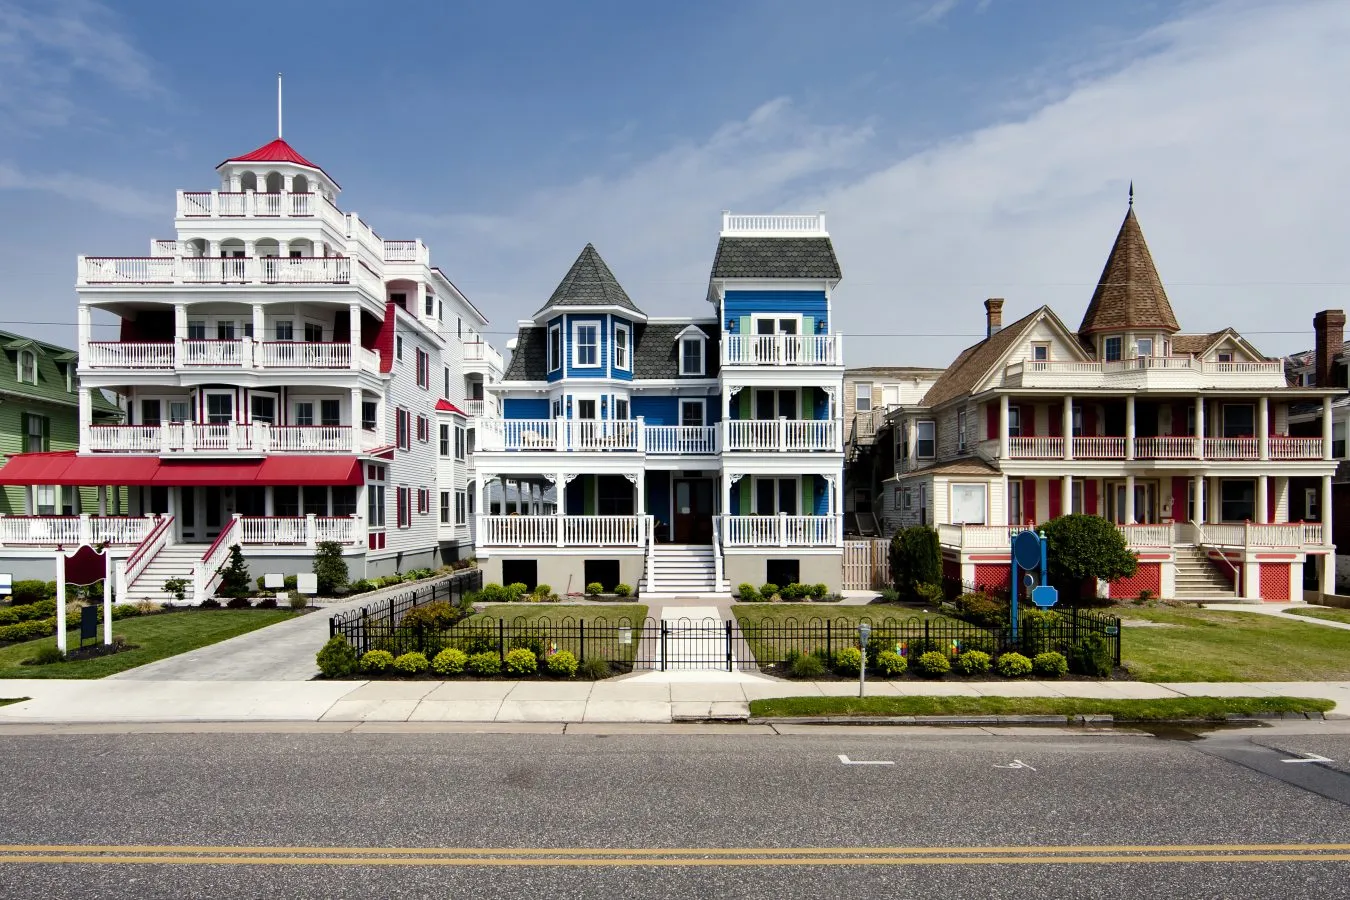 row of elaborate victorian beach homes in cape may nj, one of the best seaside towns on the east coast usa